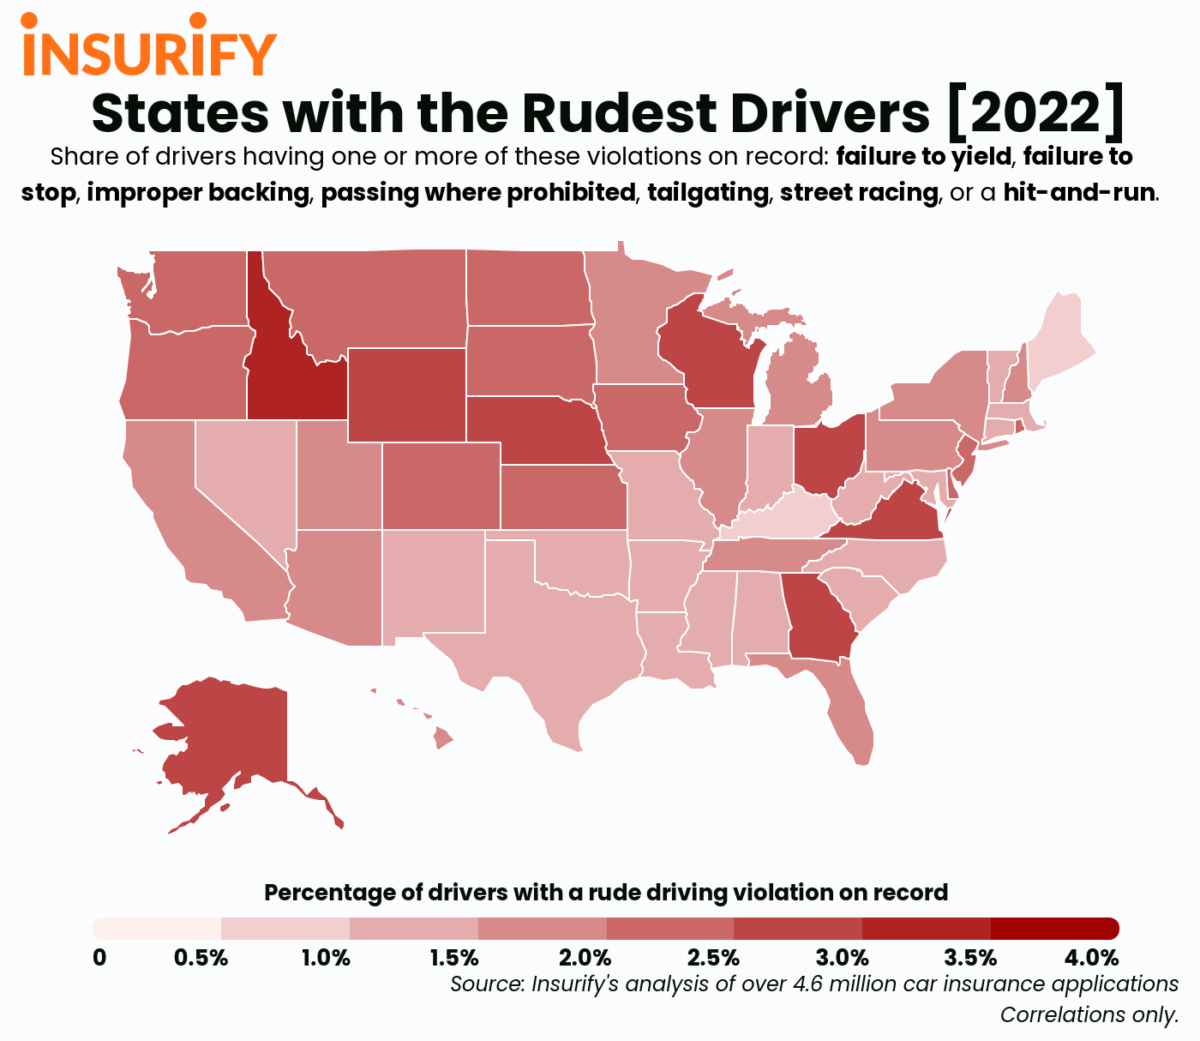 Map of the U.S. showing the rude driving rate in every state.